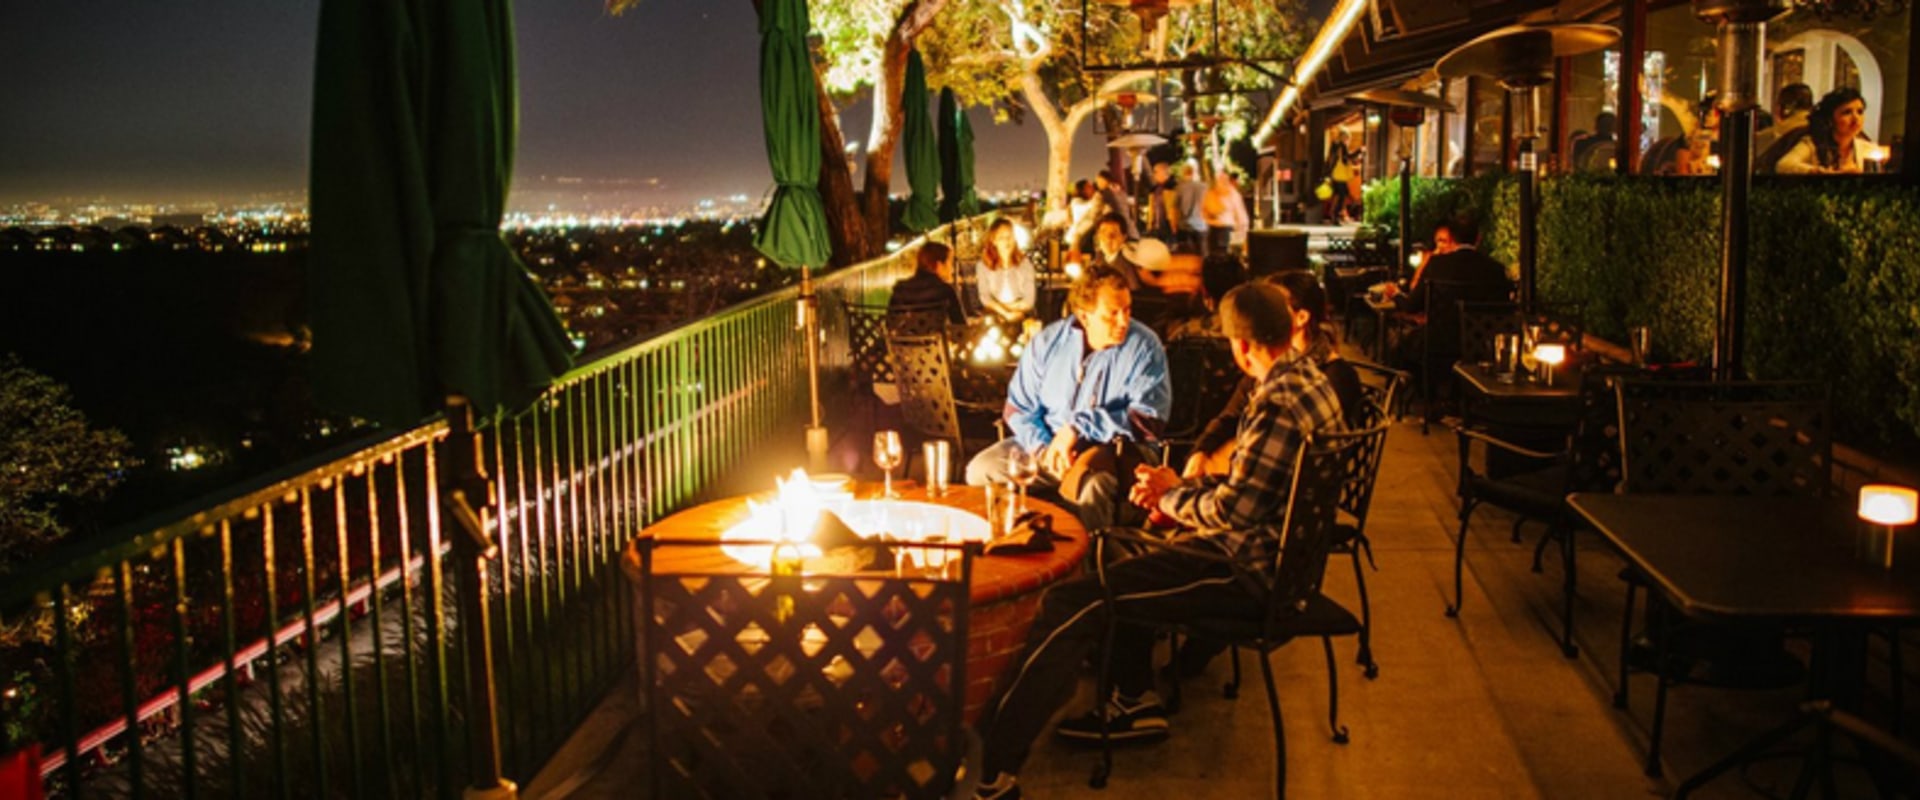 The Most Romantic Restaurants in Orange County, CA: An Expert's Guide